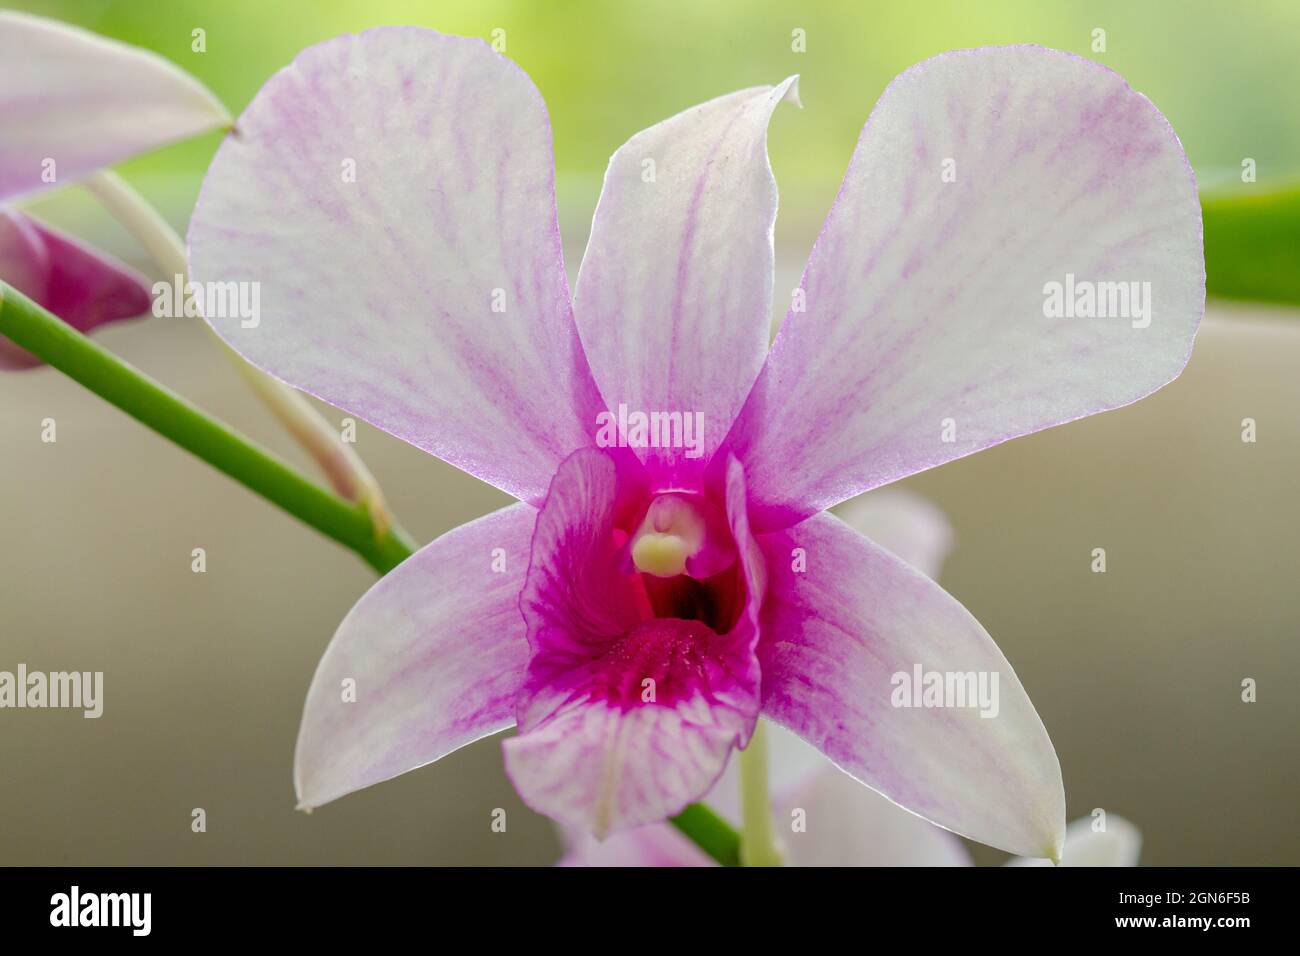 A sprig of Dendrobium nobile orchid, fully visible Stock Photo